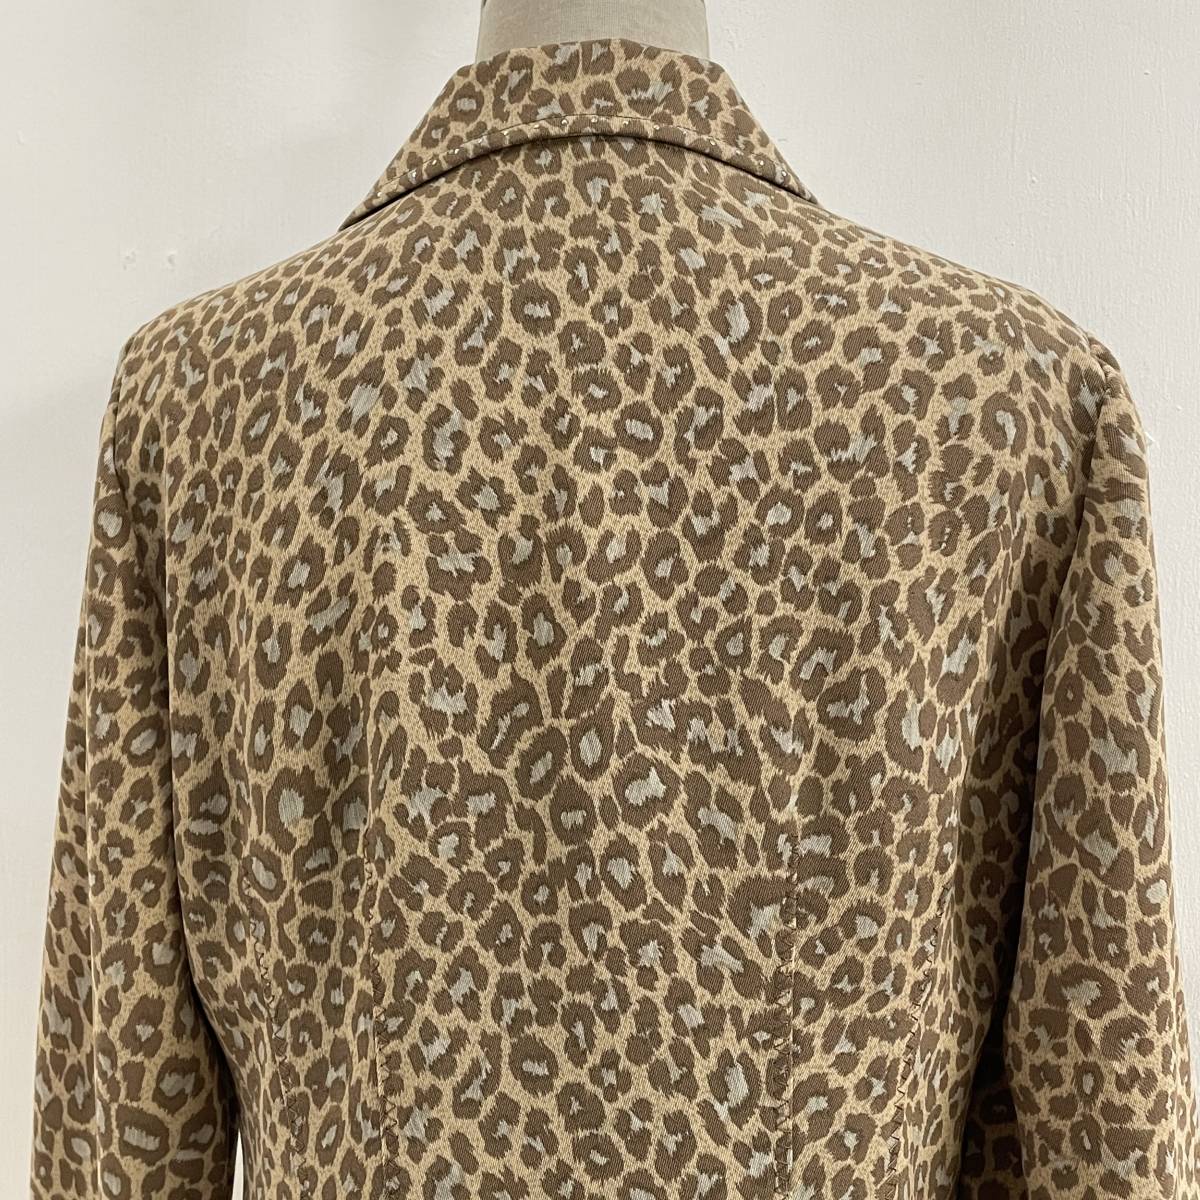 * Italiya GKita rear total pattern leopard print Leopard animal pattern jacket rhinestone equipment ornament beige group size 9[ uniform carriage / including in a package possibility ]C